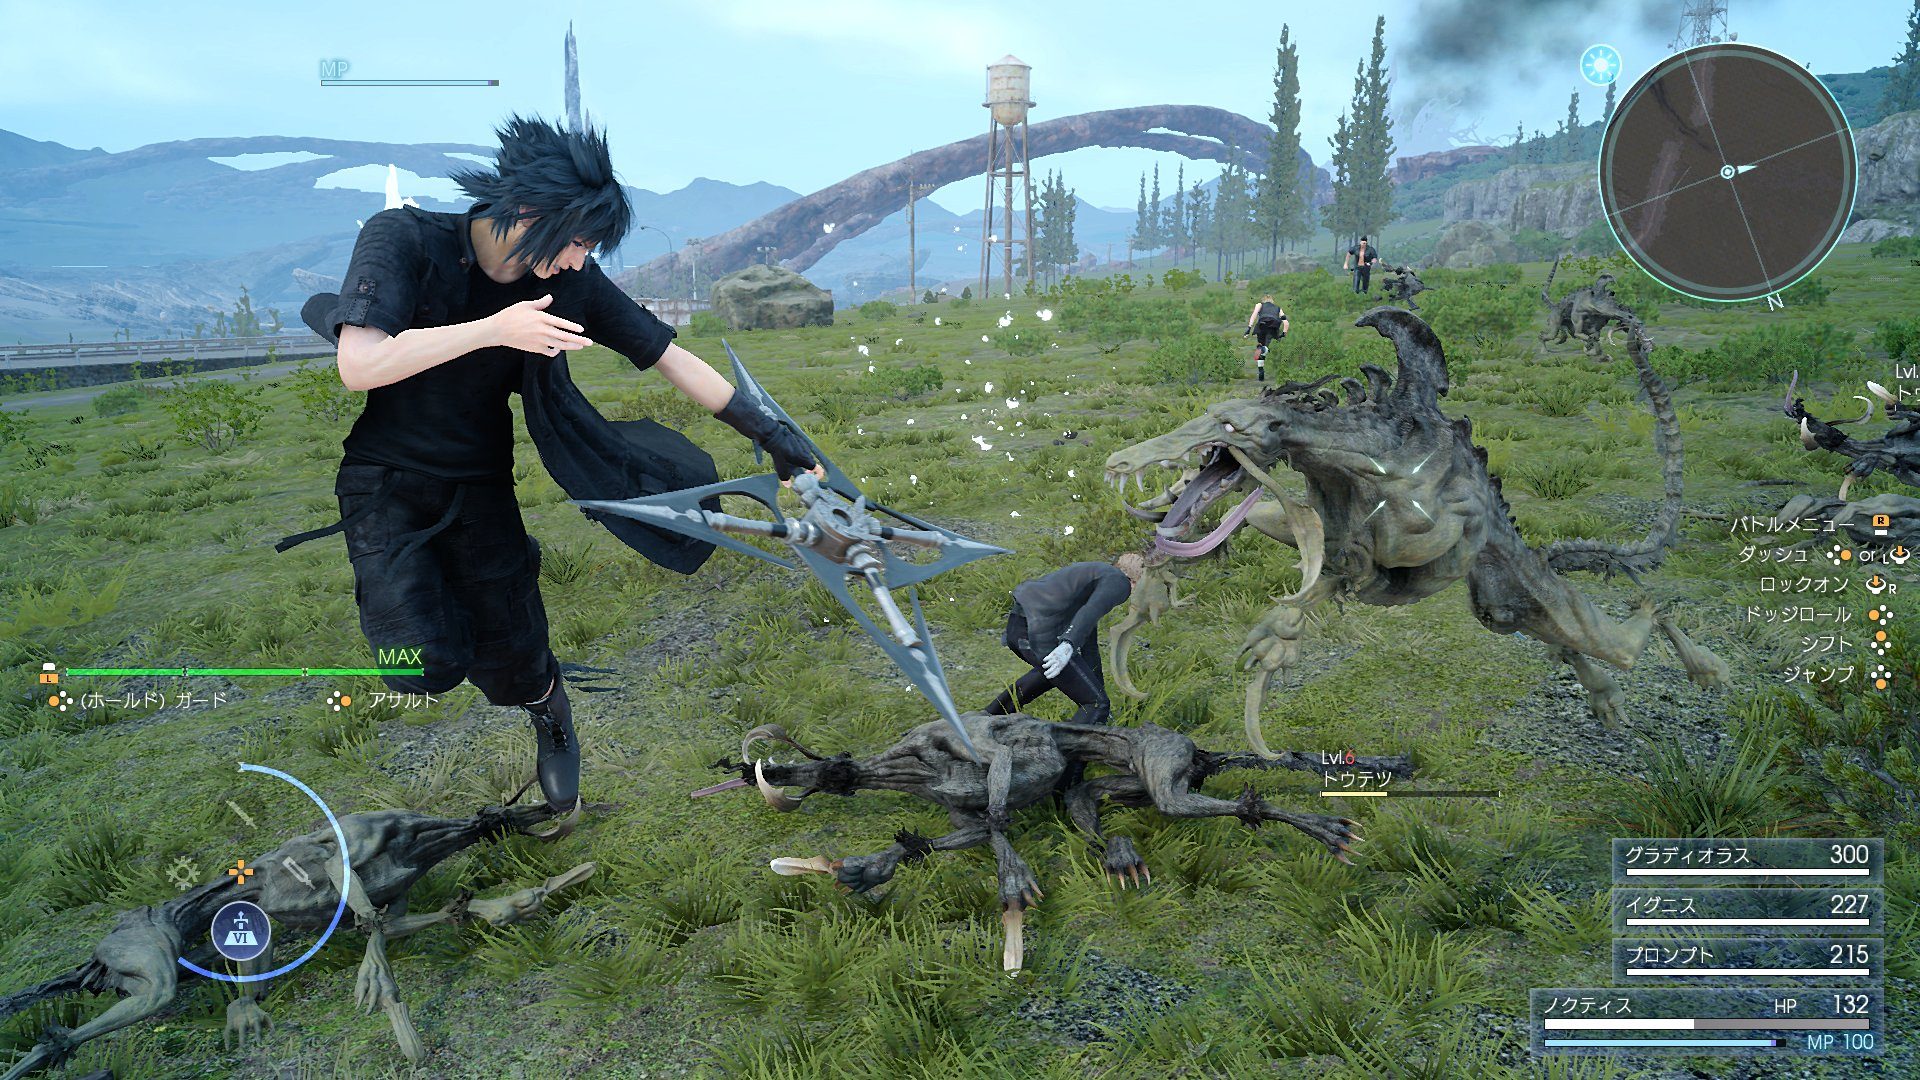 Final Fantasy Xv Has Now Shipped Over 7 Million Copies Worldwide Just Push Start